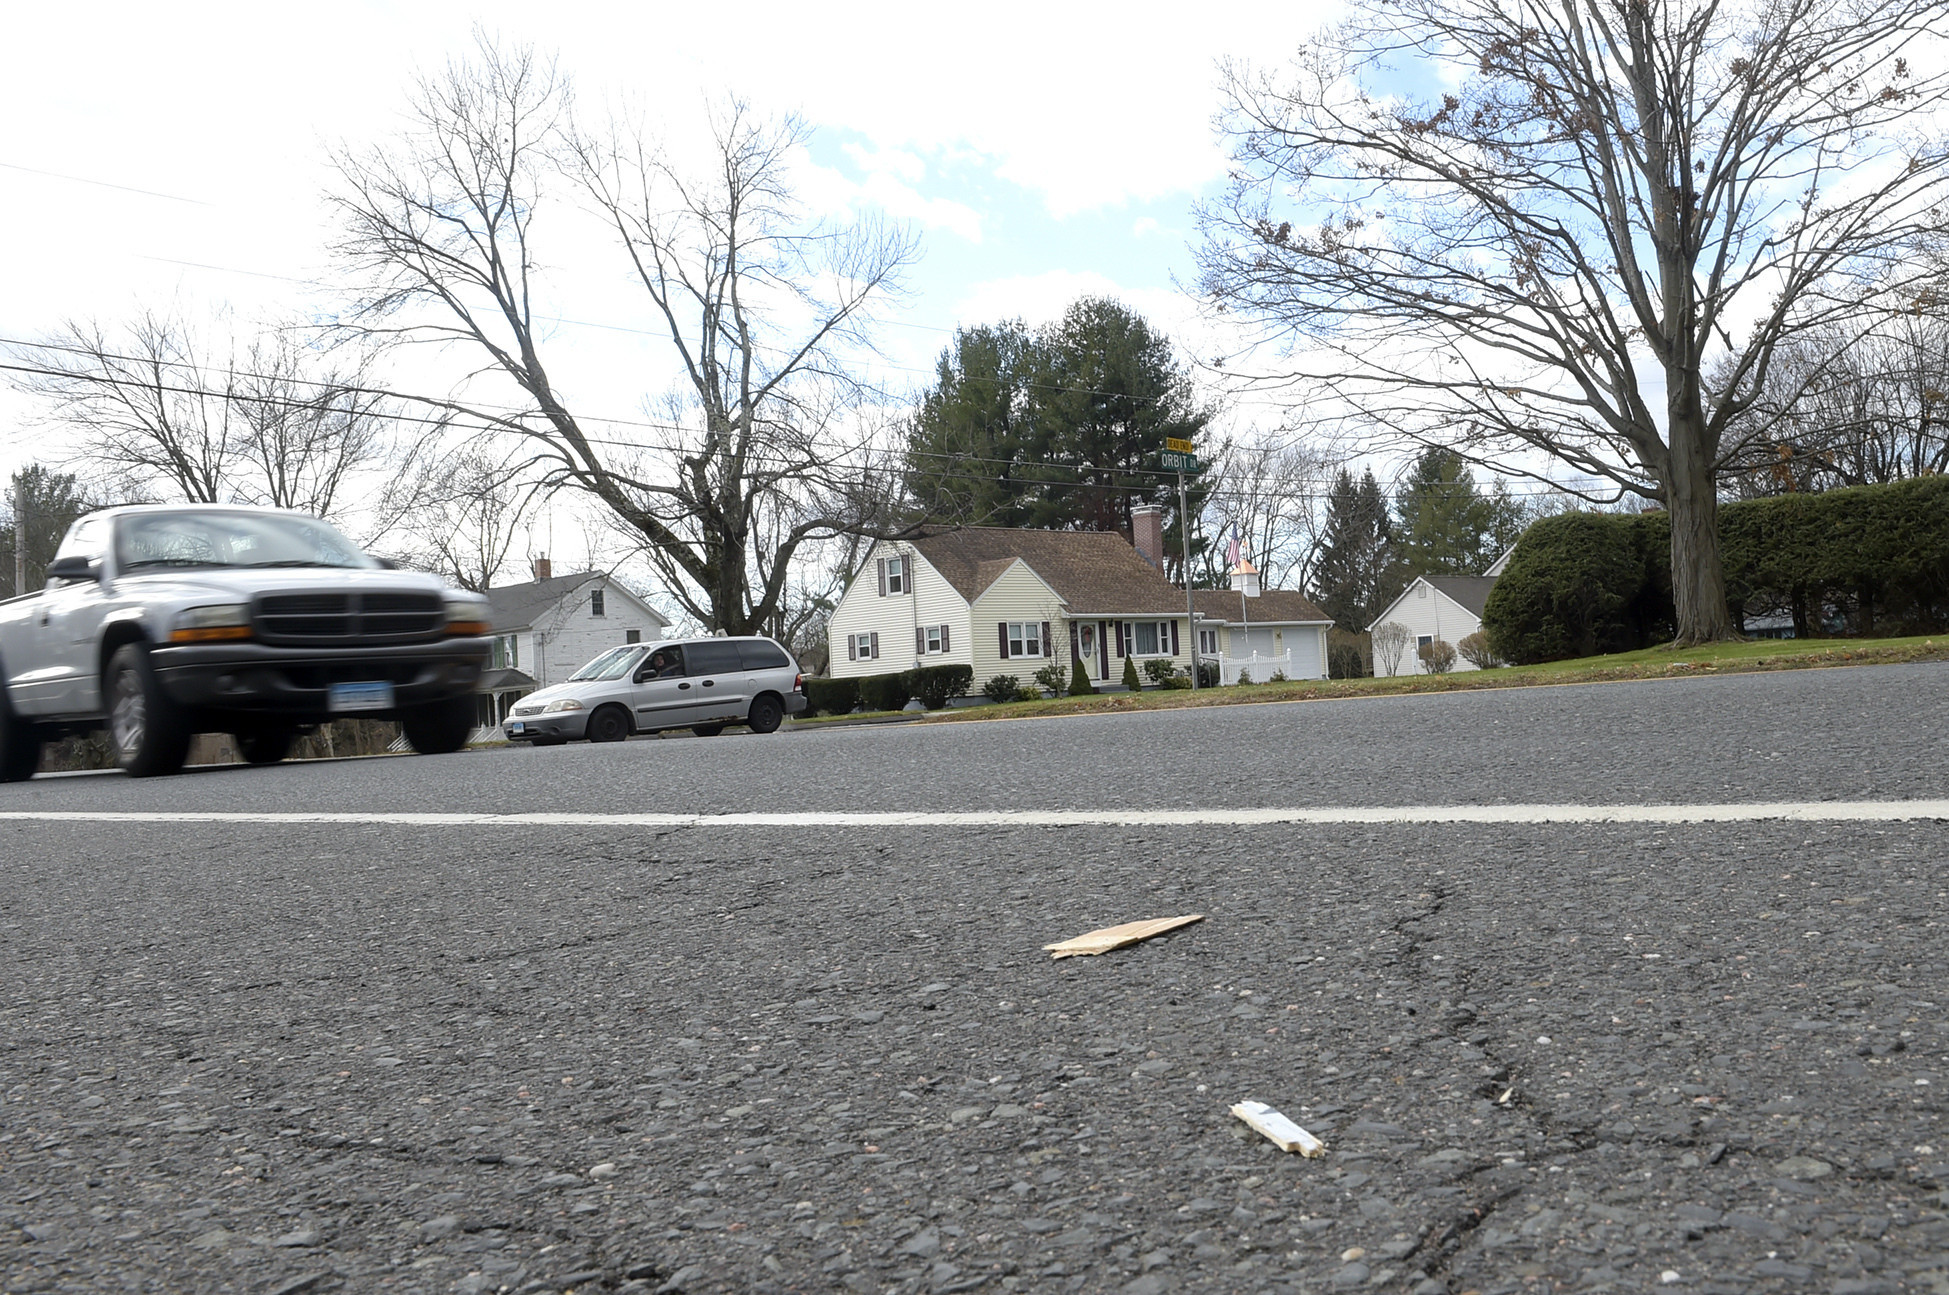 Police Identify 20-Year-Old Man Killed In Enfield Hit-And-Run - Hartford Courant